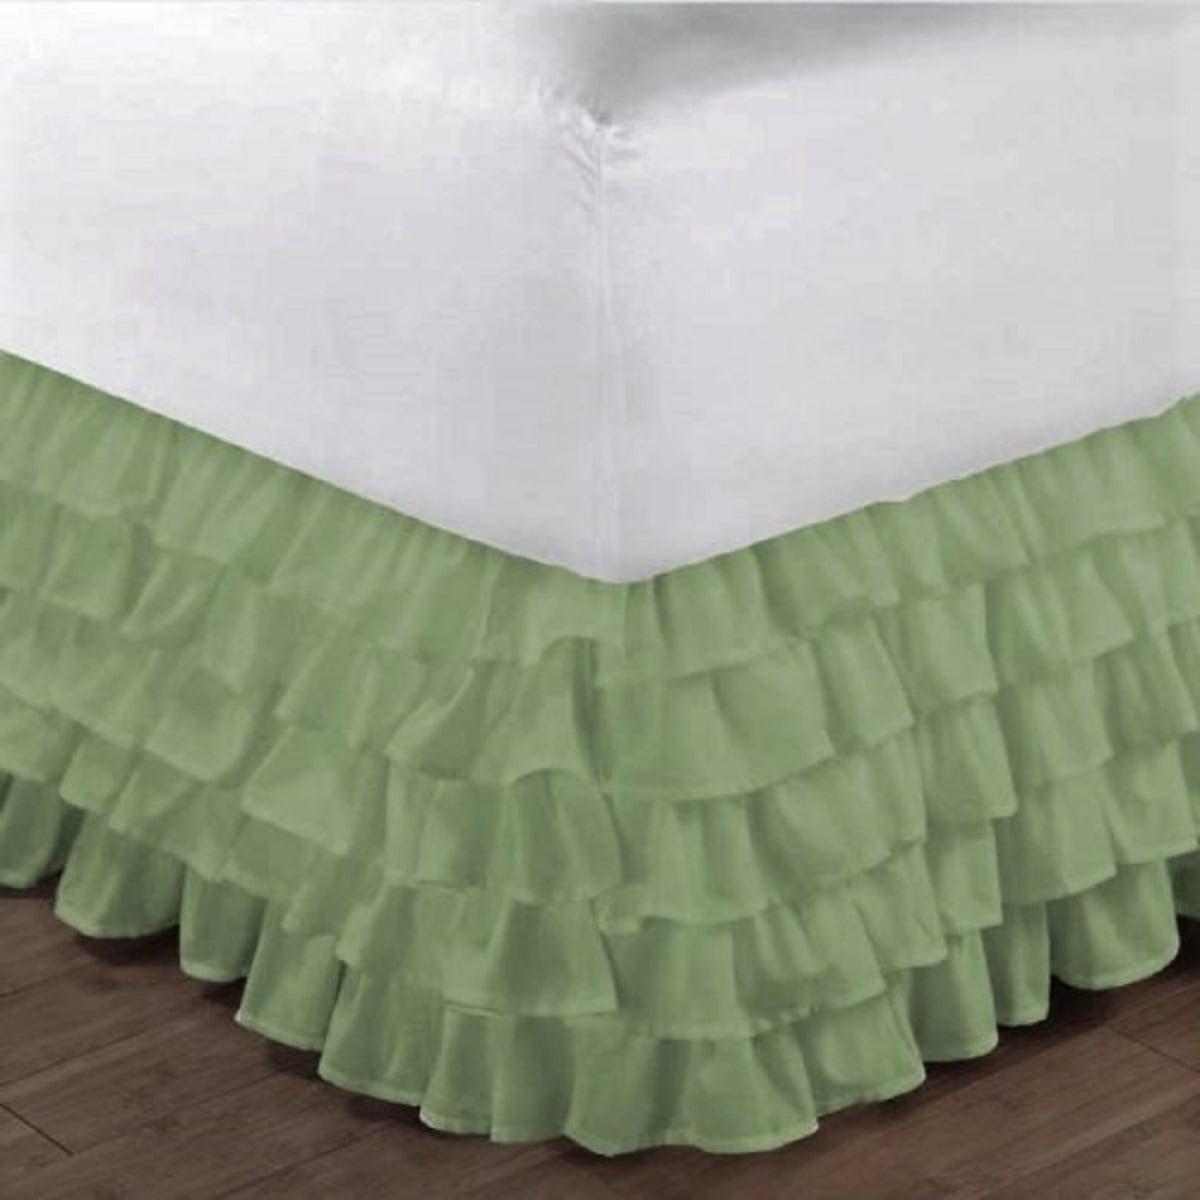 Details about  / Croscill Bed Skirt Queen Size Sage Green Gold